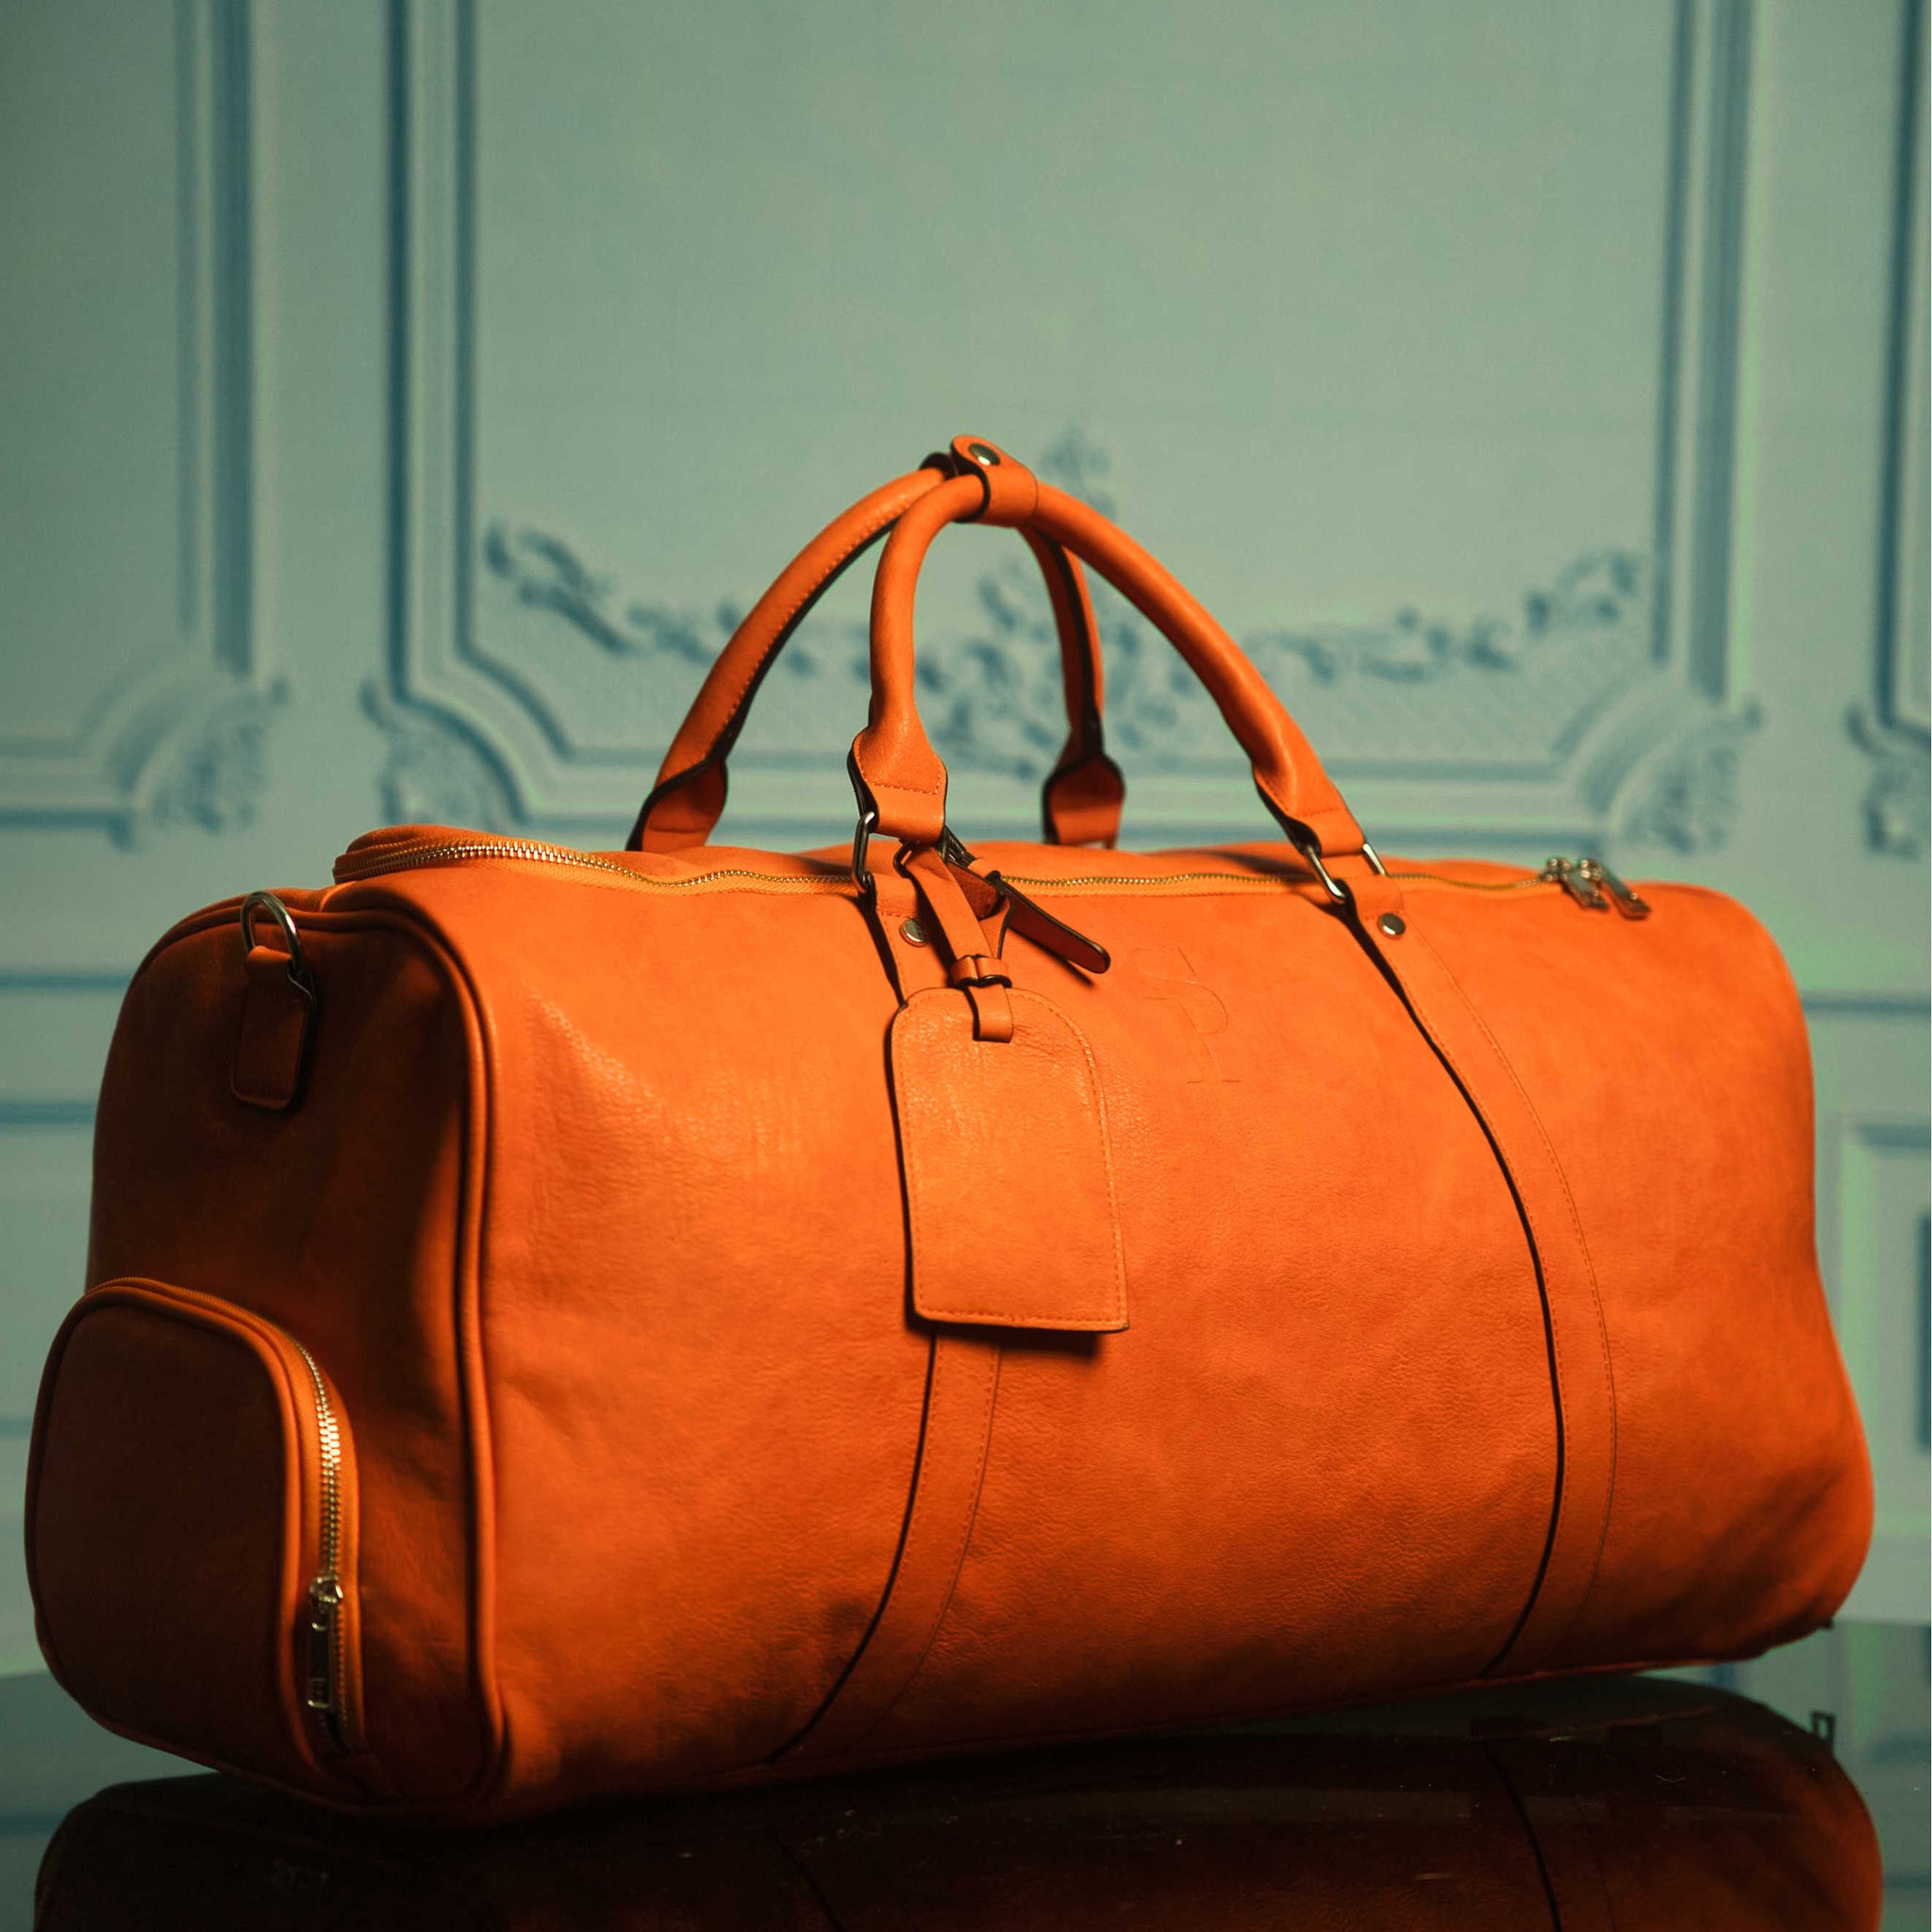 Linen And Leather Duffel Bag by Giorgio Armani Men at ORCHARD MILE